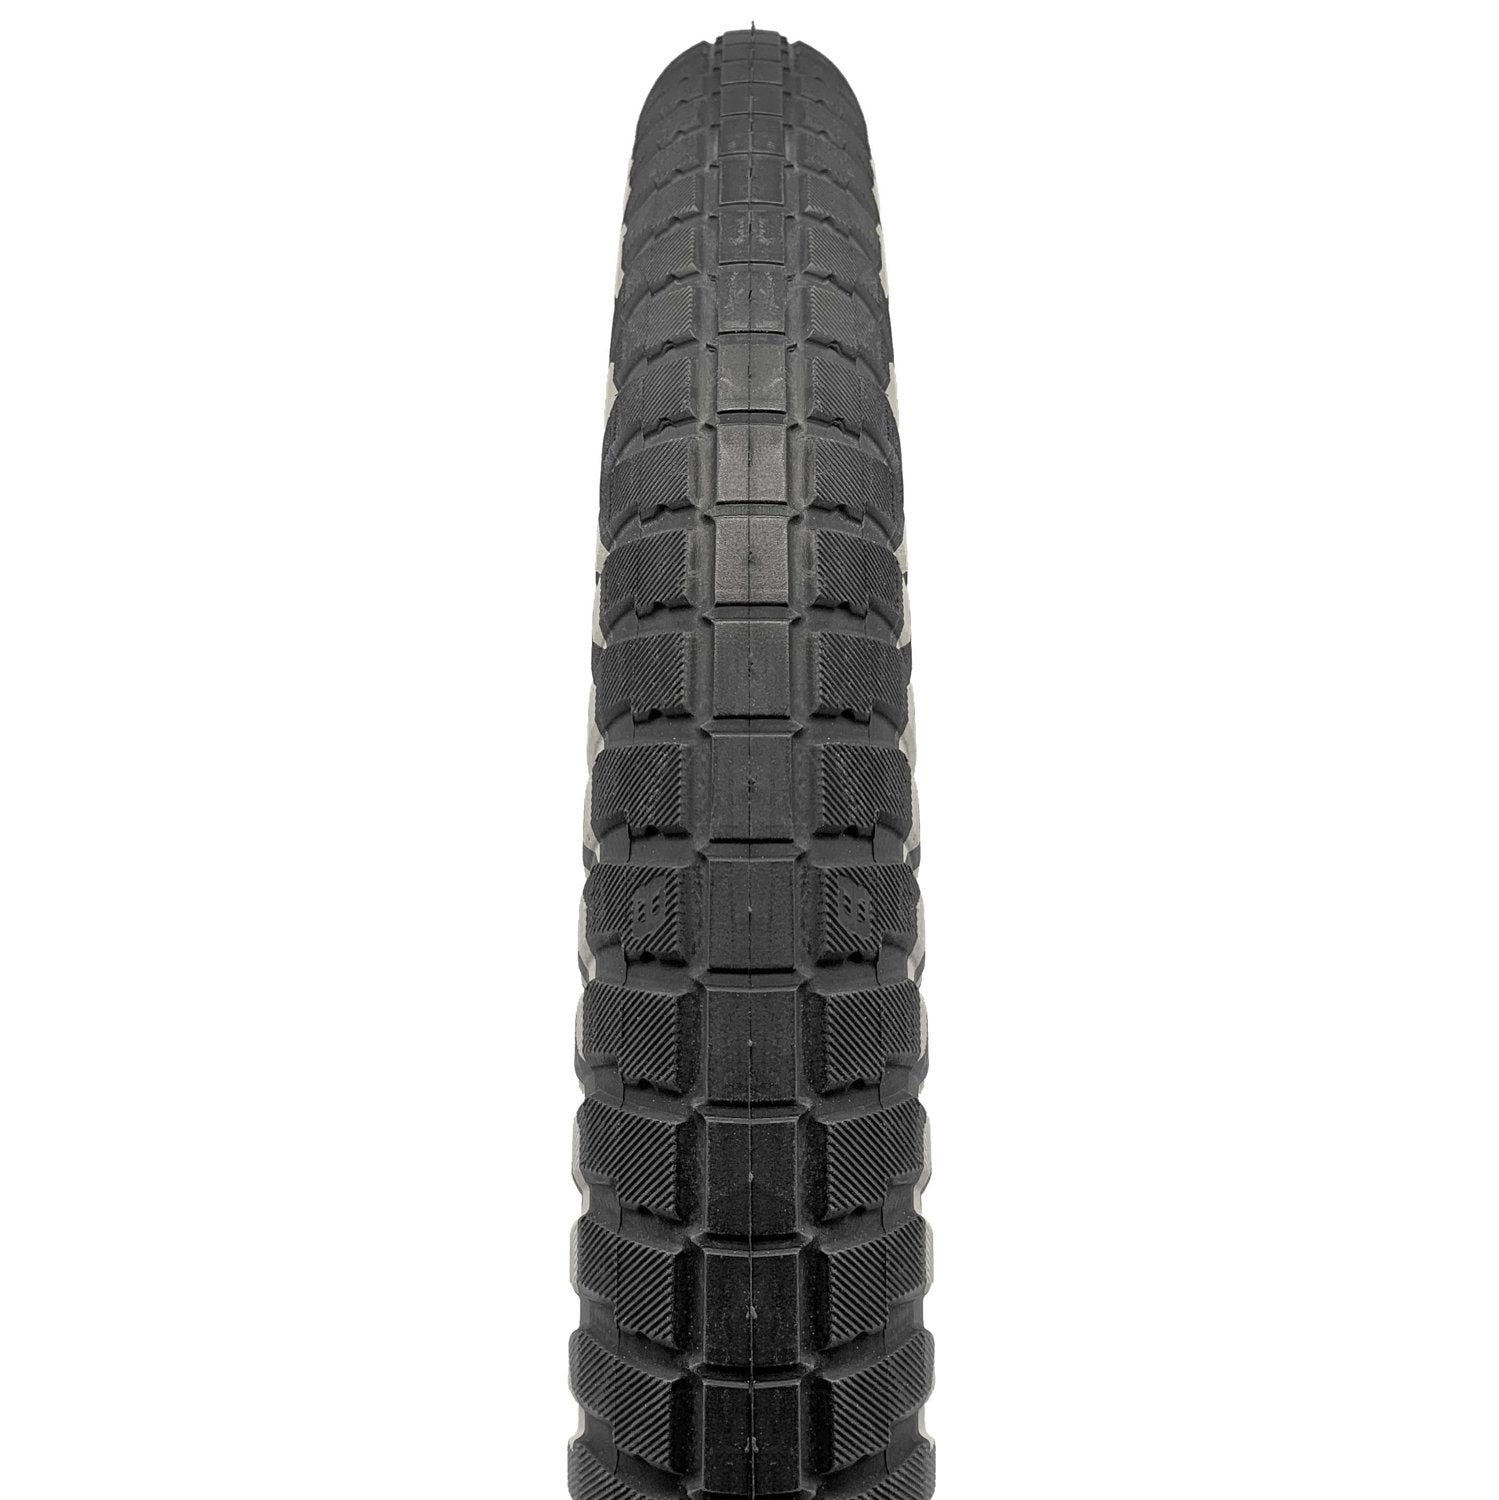 eastern bikes 20 inch curb monkey tires 100psi black and silver 6